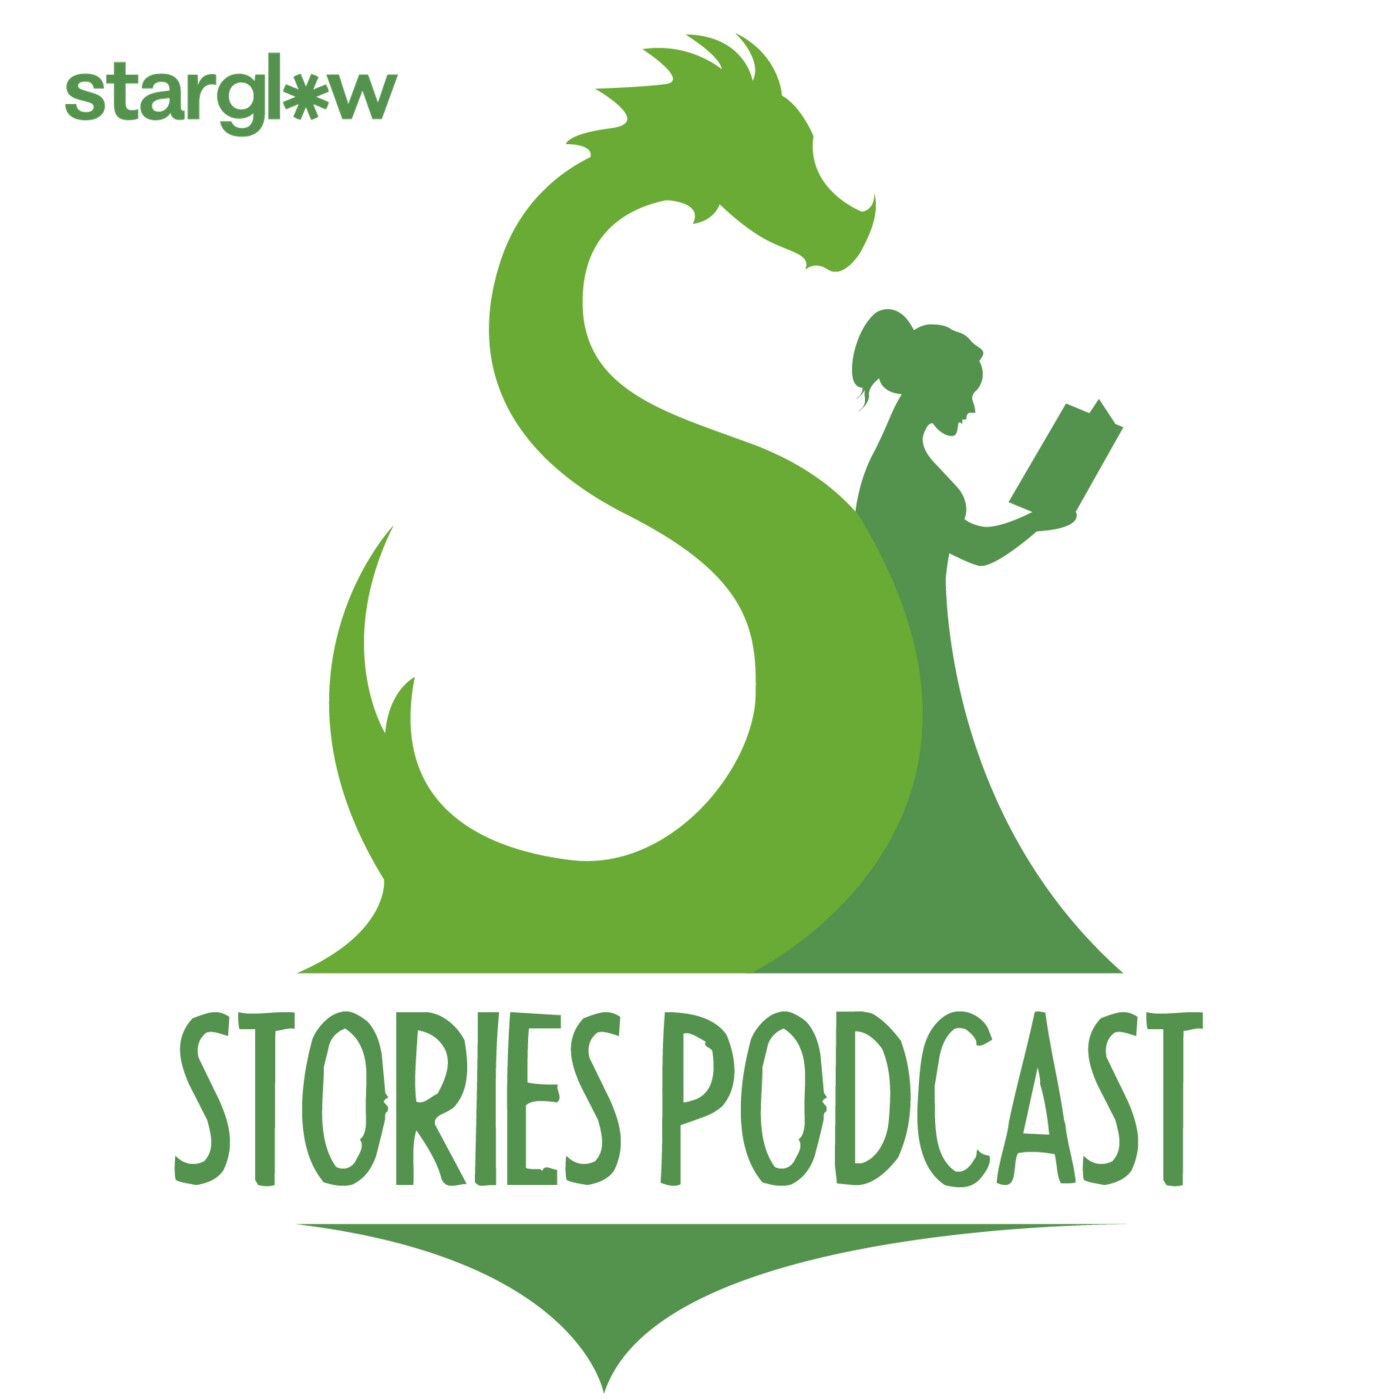 Stories Podcast: A Bedtime Show for Kids of All Ages podcast